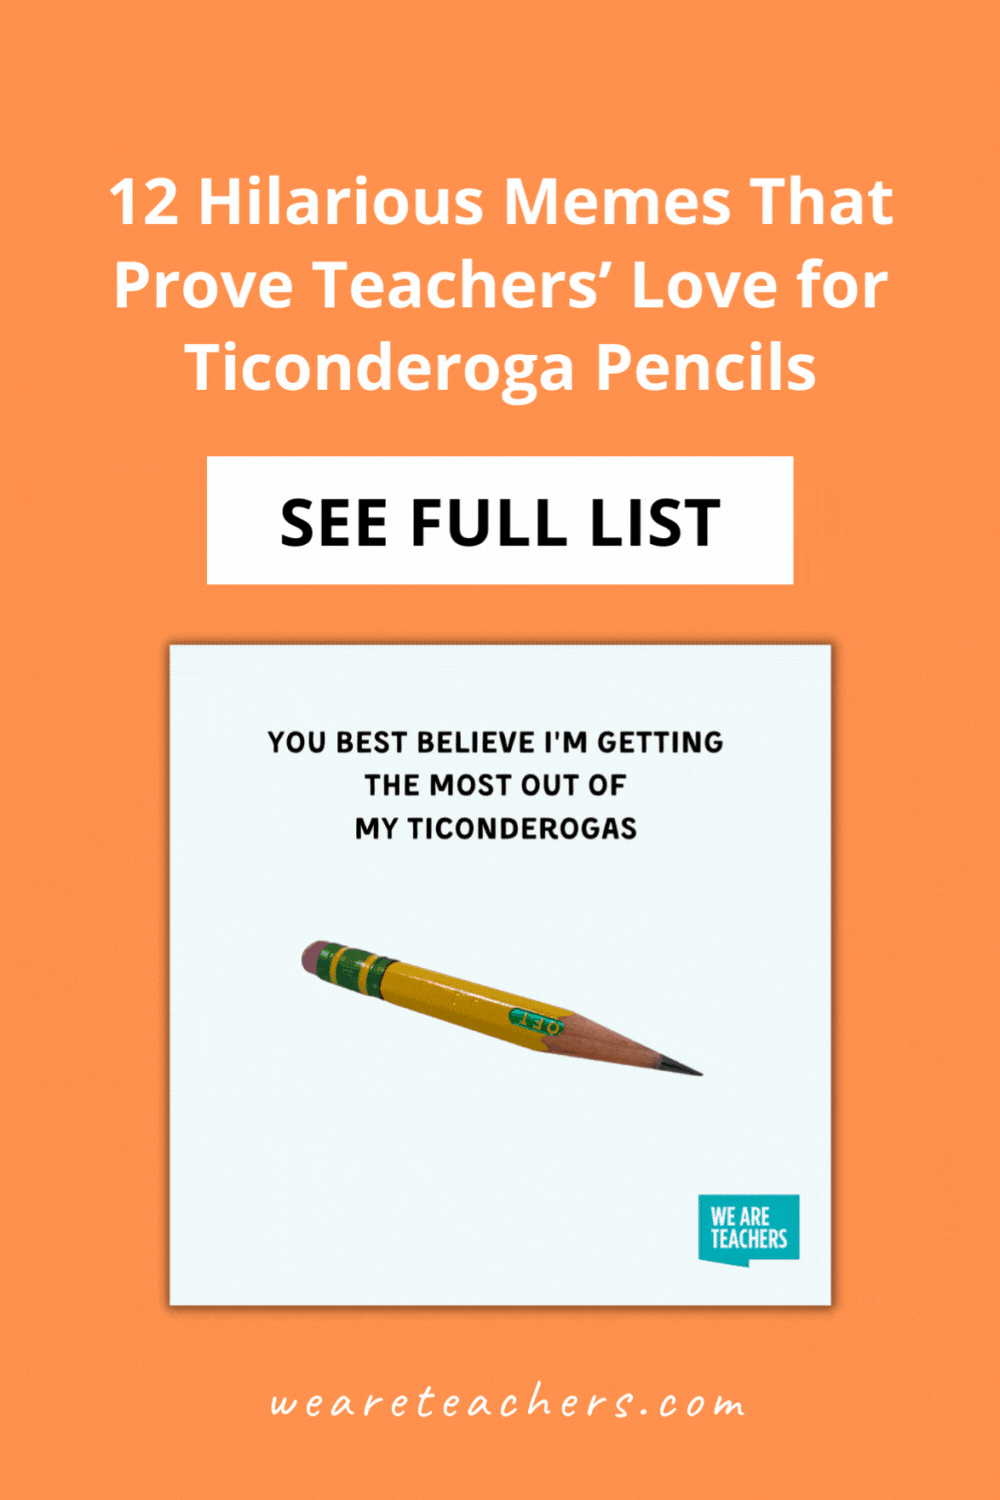 It's no secret Ticonderogas are a go-to. This list of Ticonderoga pencil memes proves teachers' commitment to them!